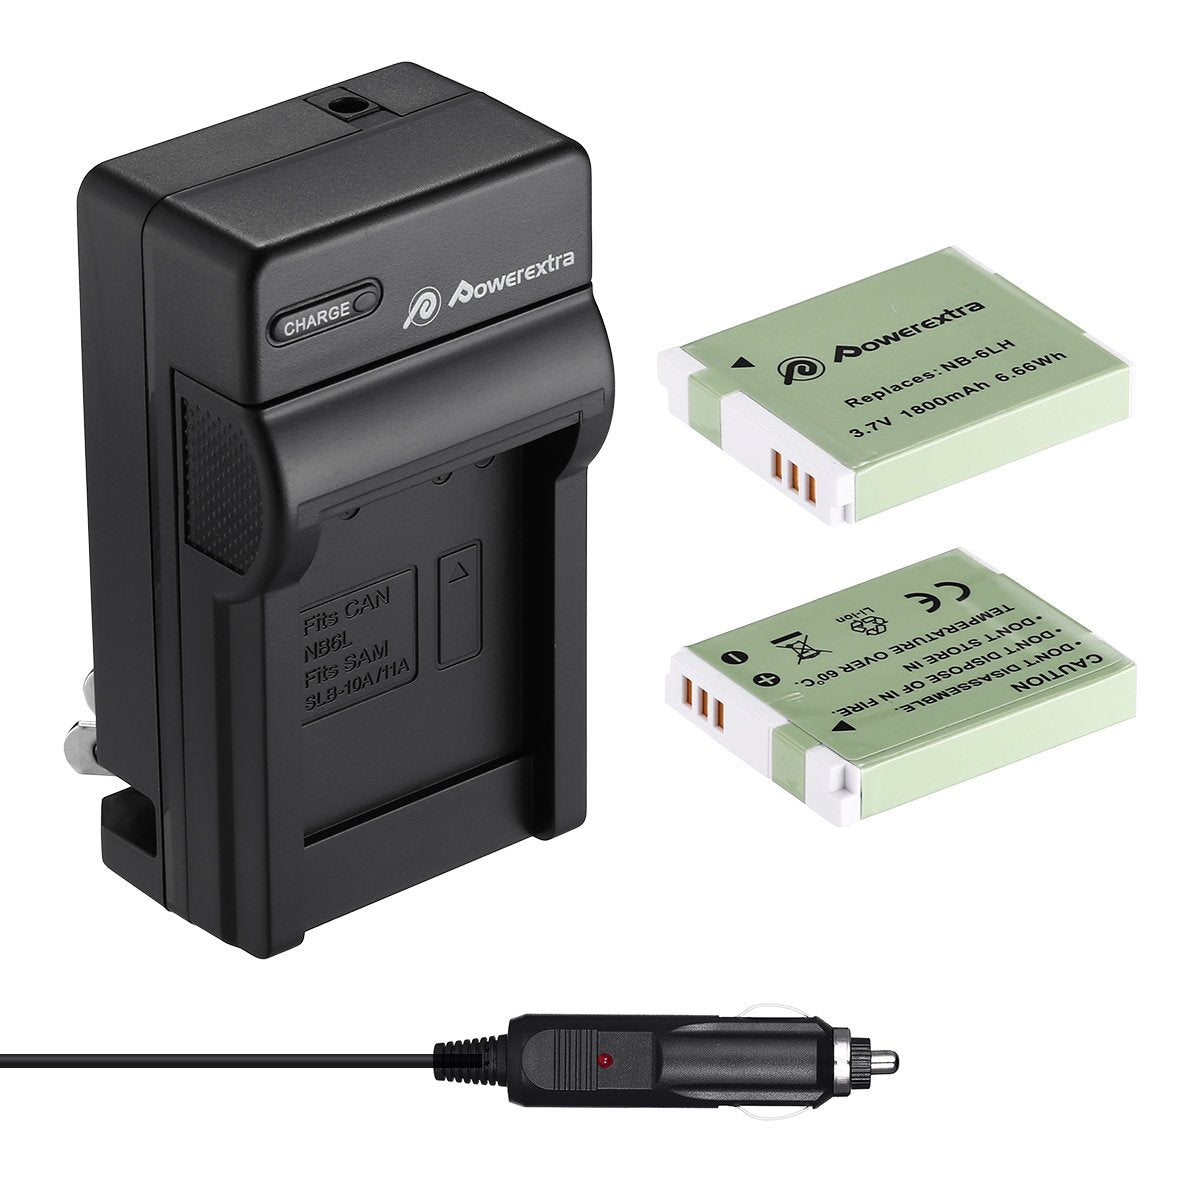 Powerextra Upgraded NB-6L NB-6LH Battery and Charger for Powershot S120 SX510 HS